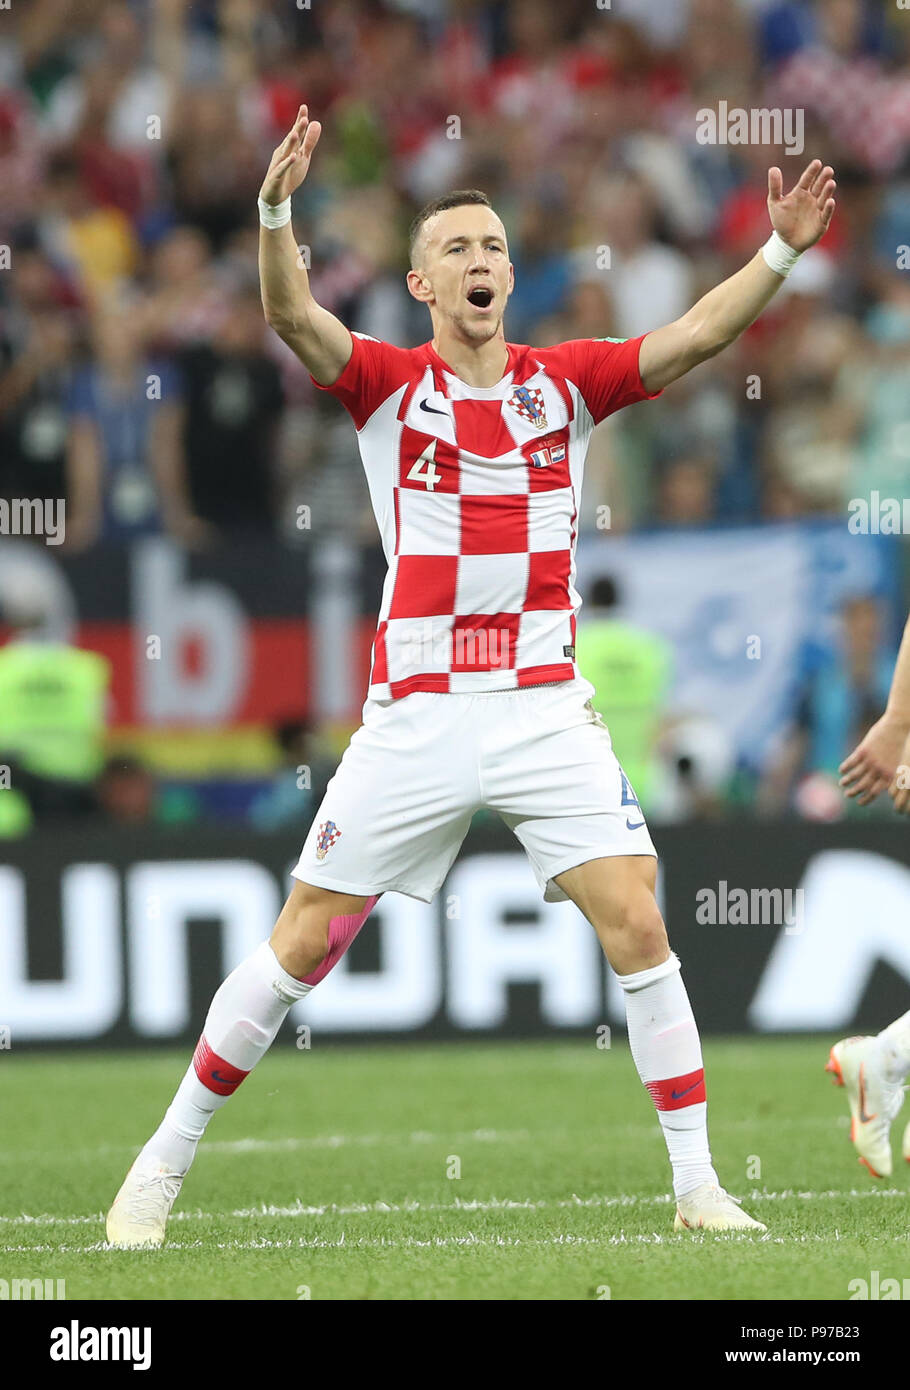 (180715) -- MOSCOW, July 15, 2018 (Xinhua) -- Ivan Perisic of Croatia celebrates scoring during the 2018 FIFA World Cup final match between France and Croatia in Moscow, Russia, July 15, 2018. (Xinhua/Cao Can) Stock Photo